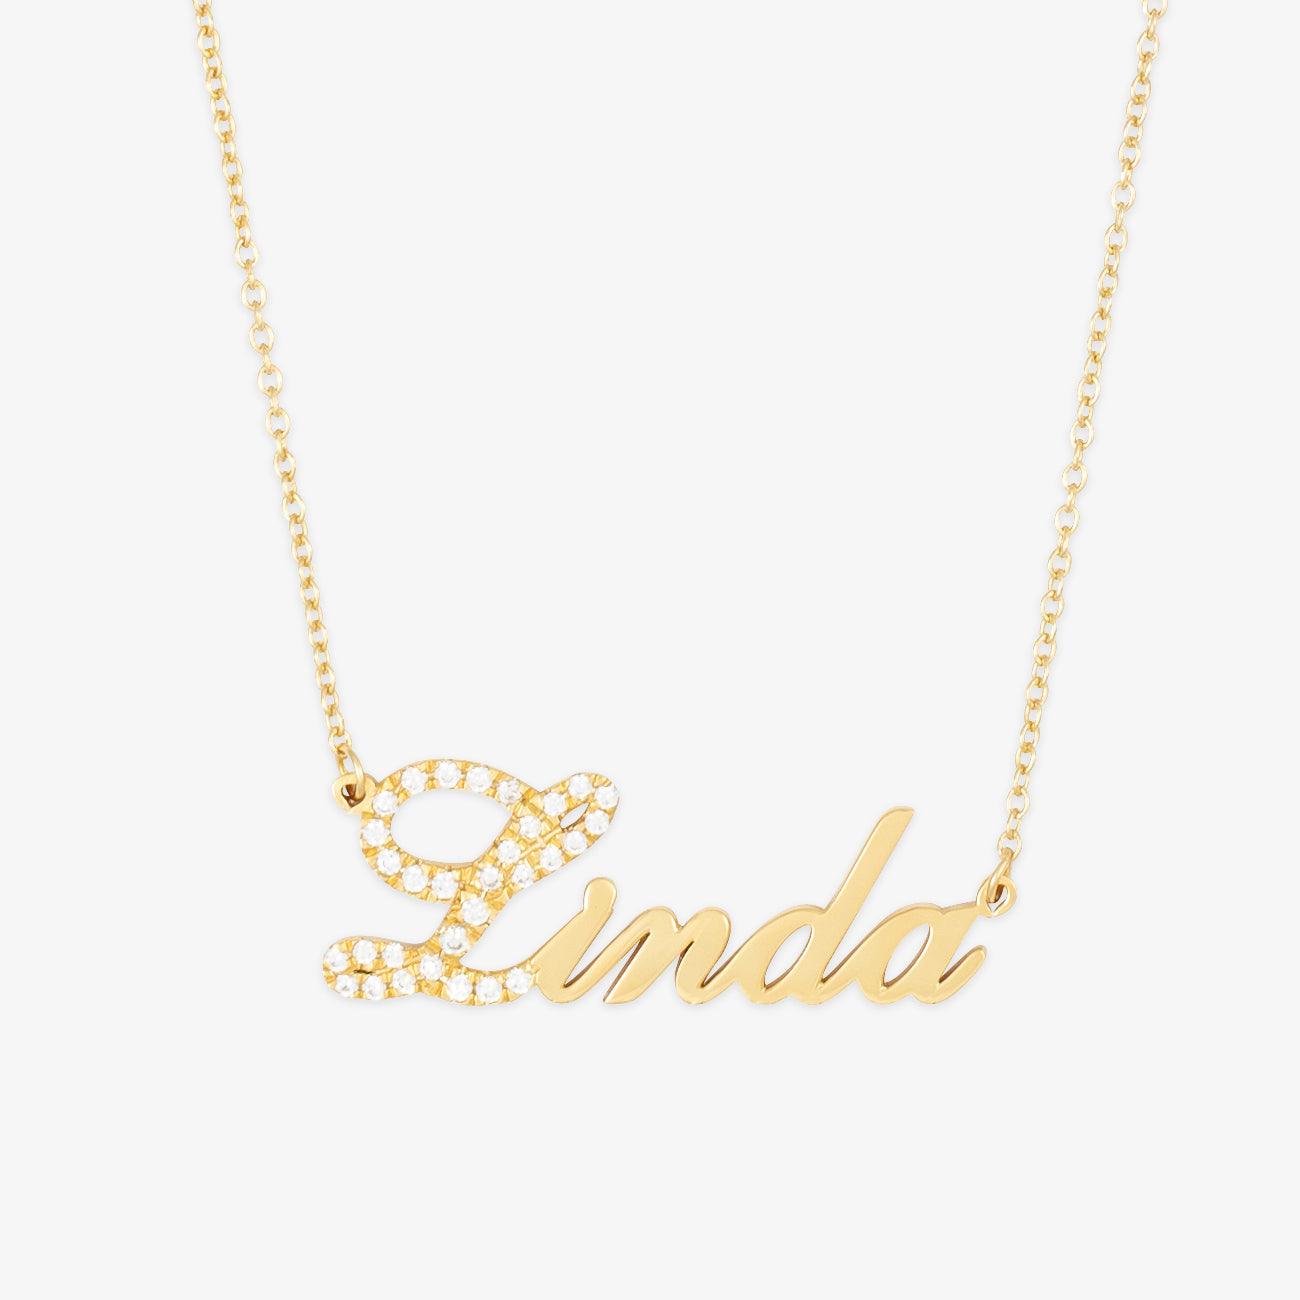 Luxury Zirconia-Adorned Name Necklace - Name Necklaces - Name Necklaces